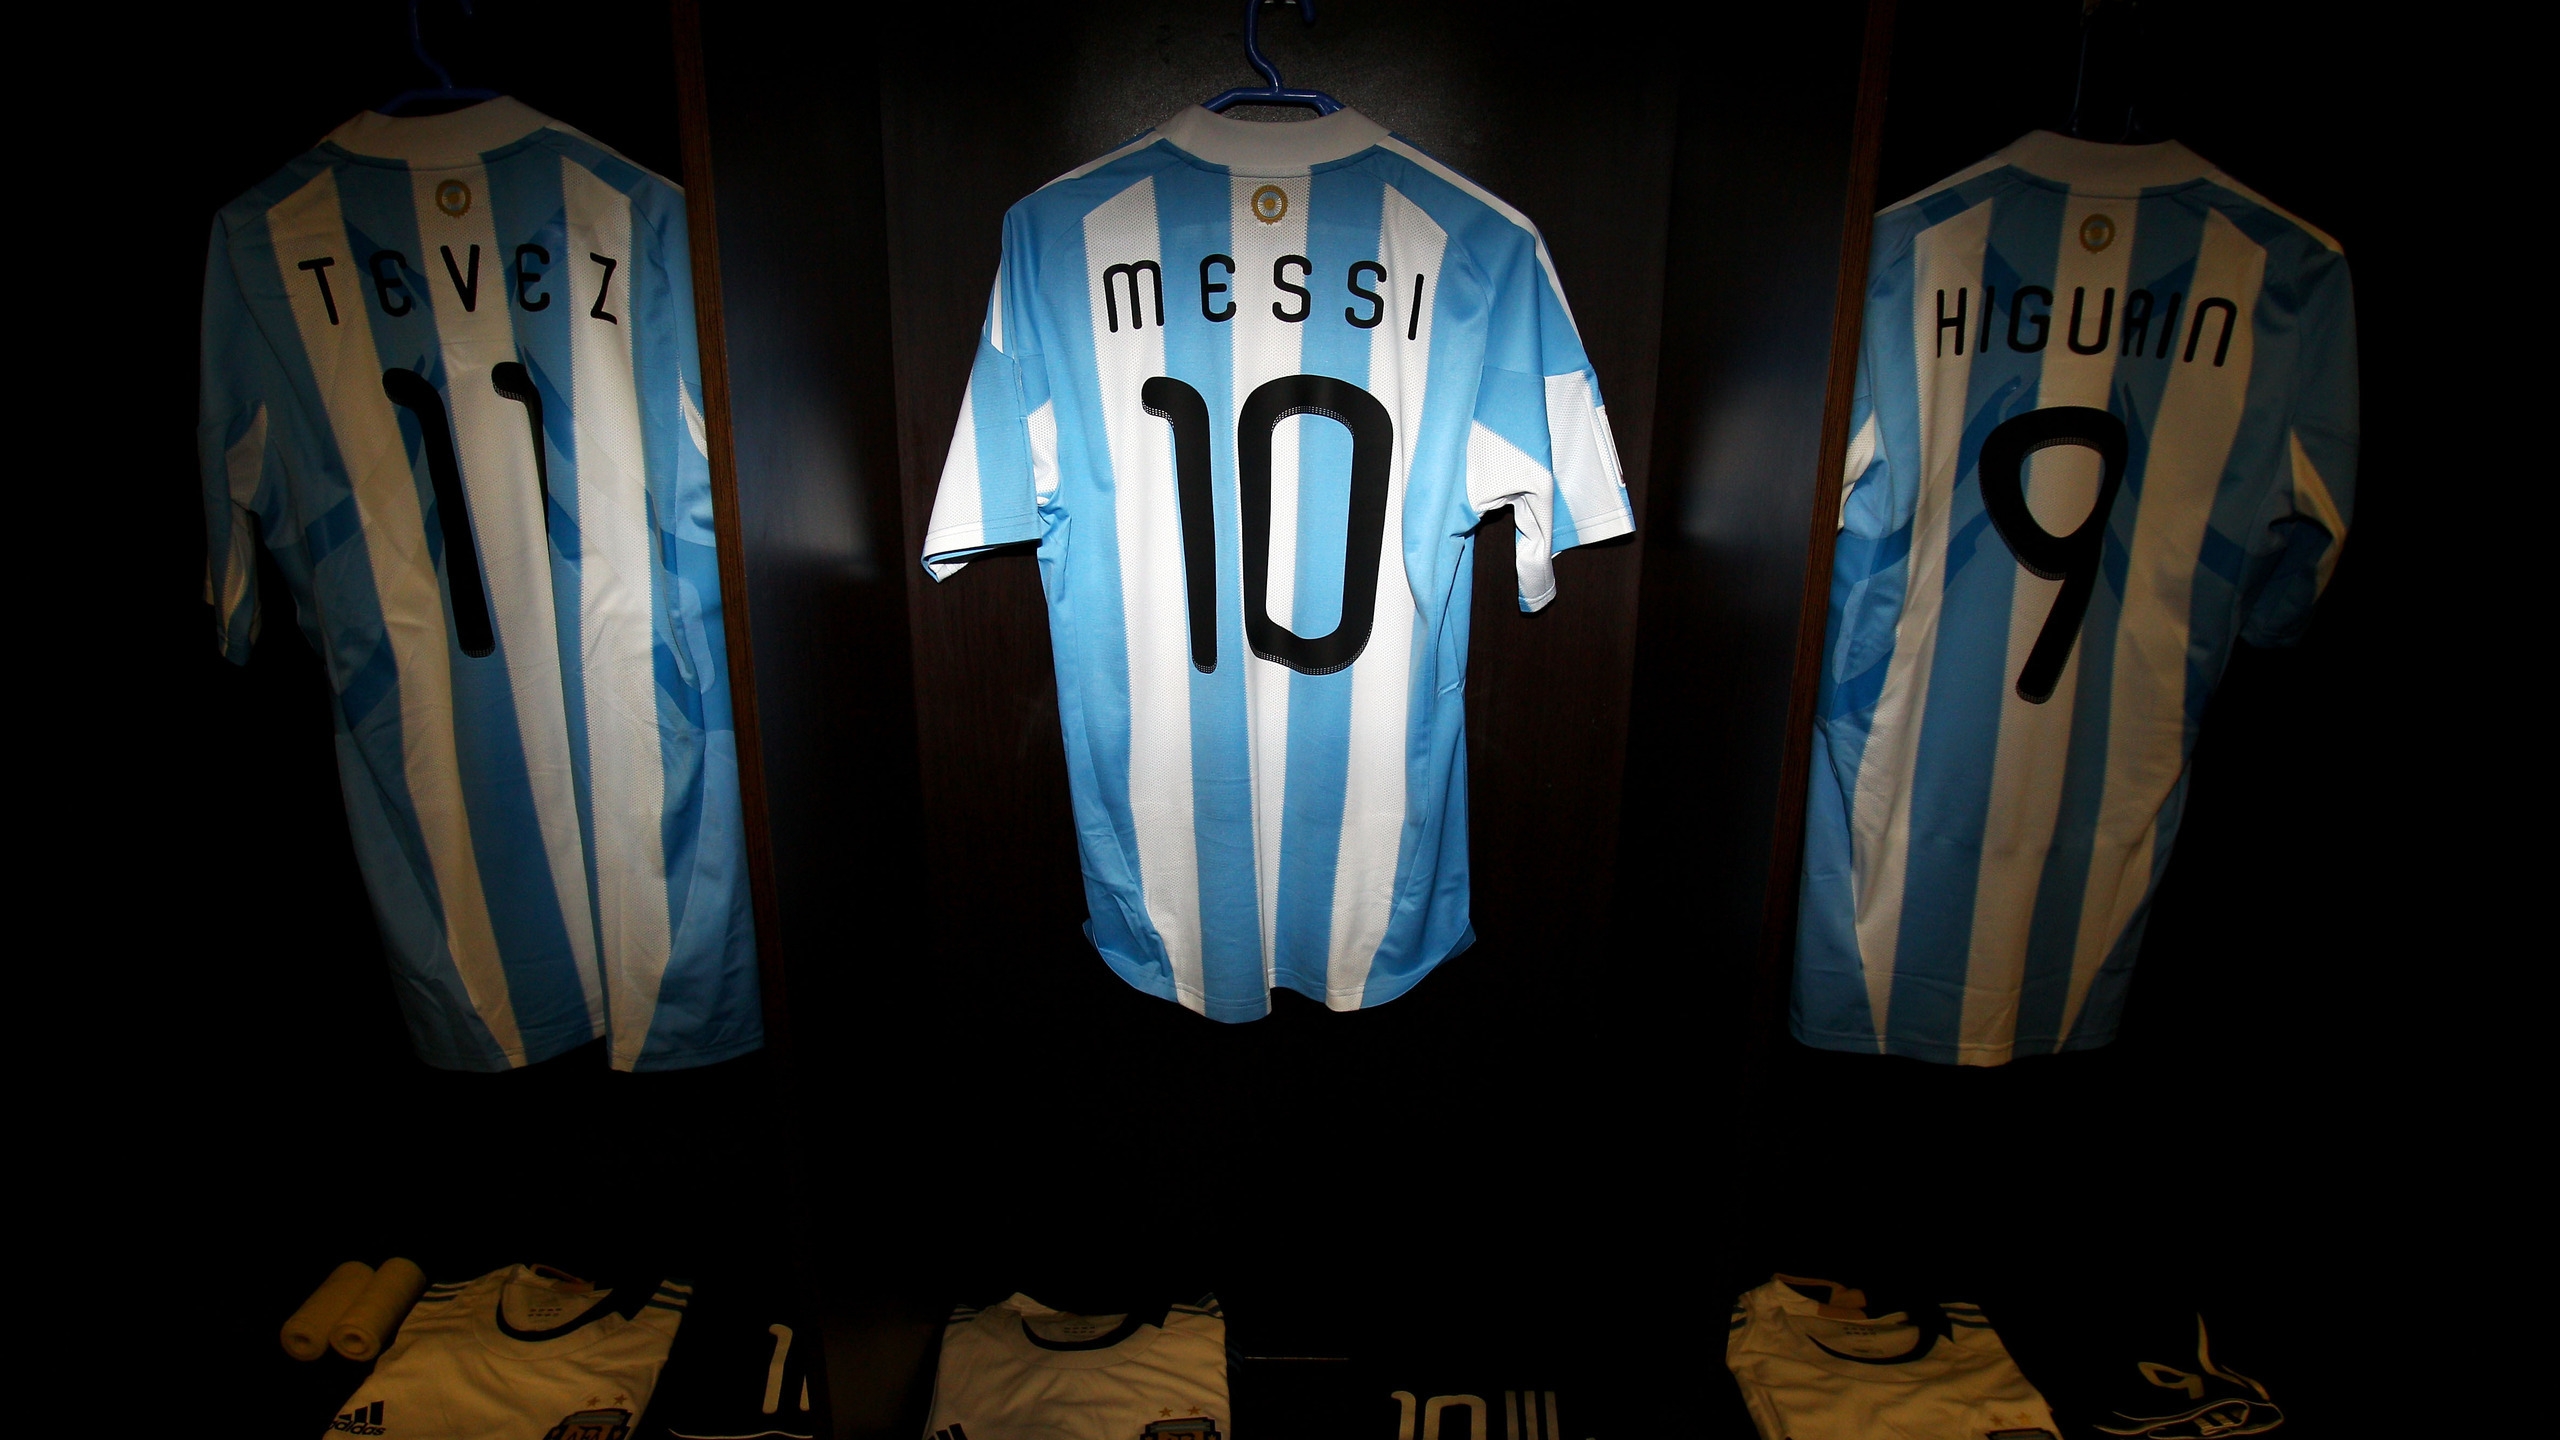 Tshirt of Messi, Tevez and Higuain for 2560x1440 HDTV resolution